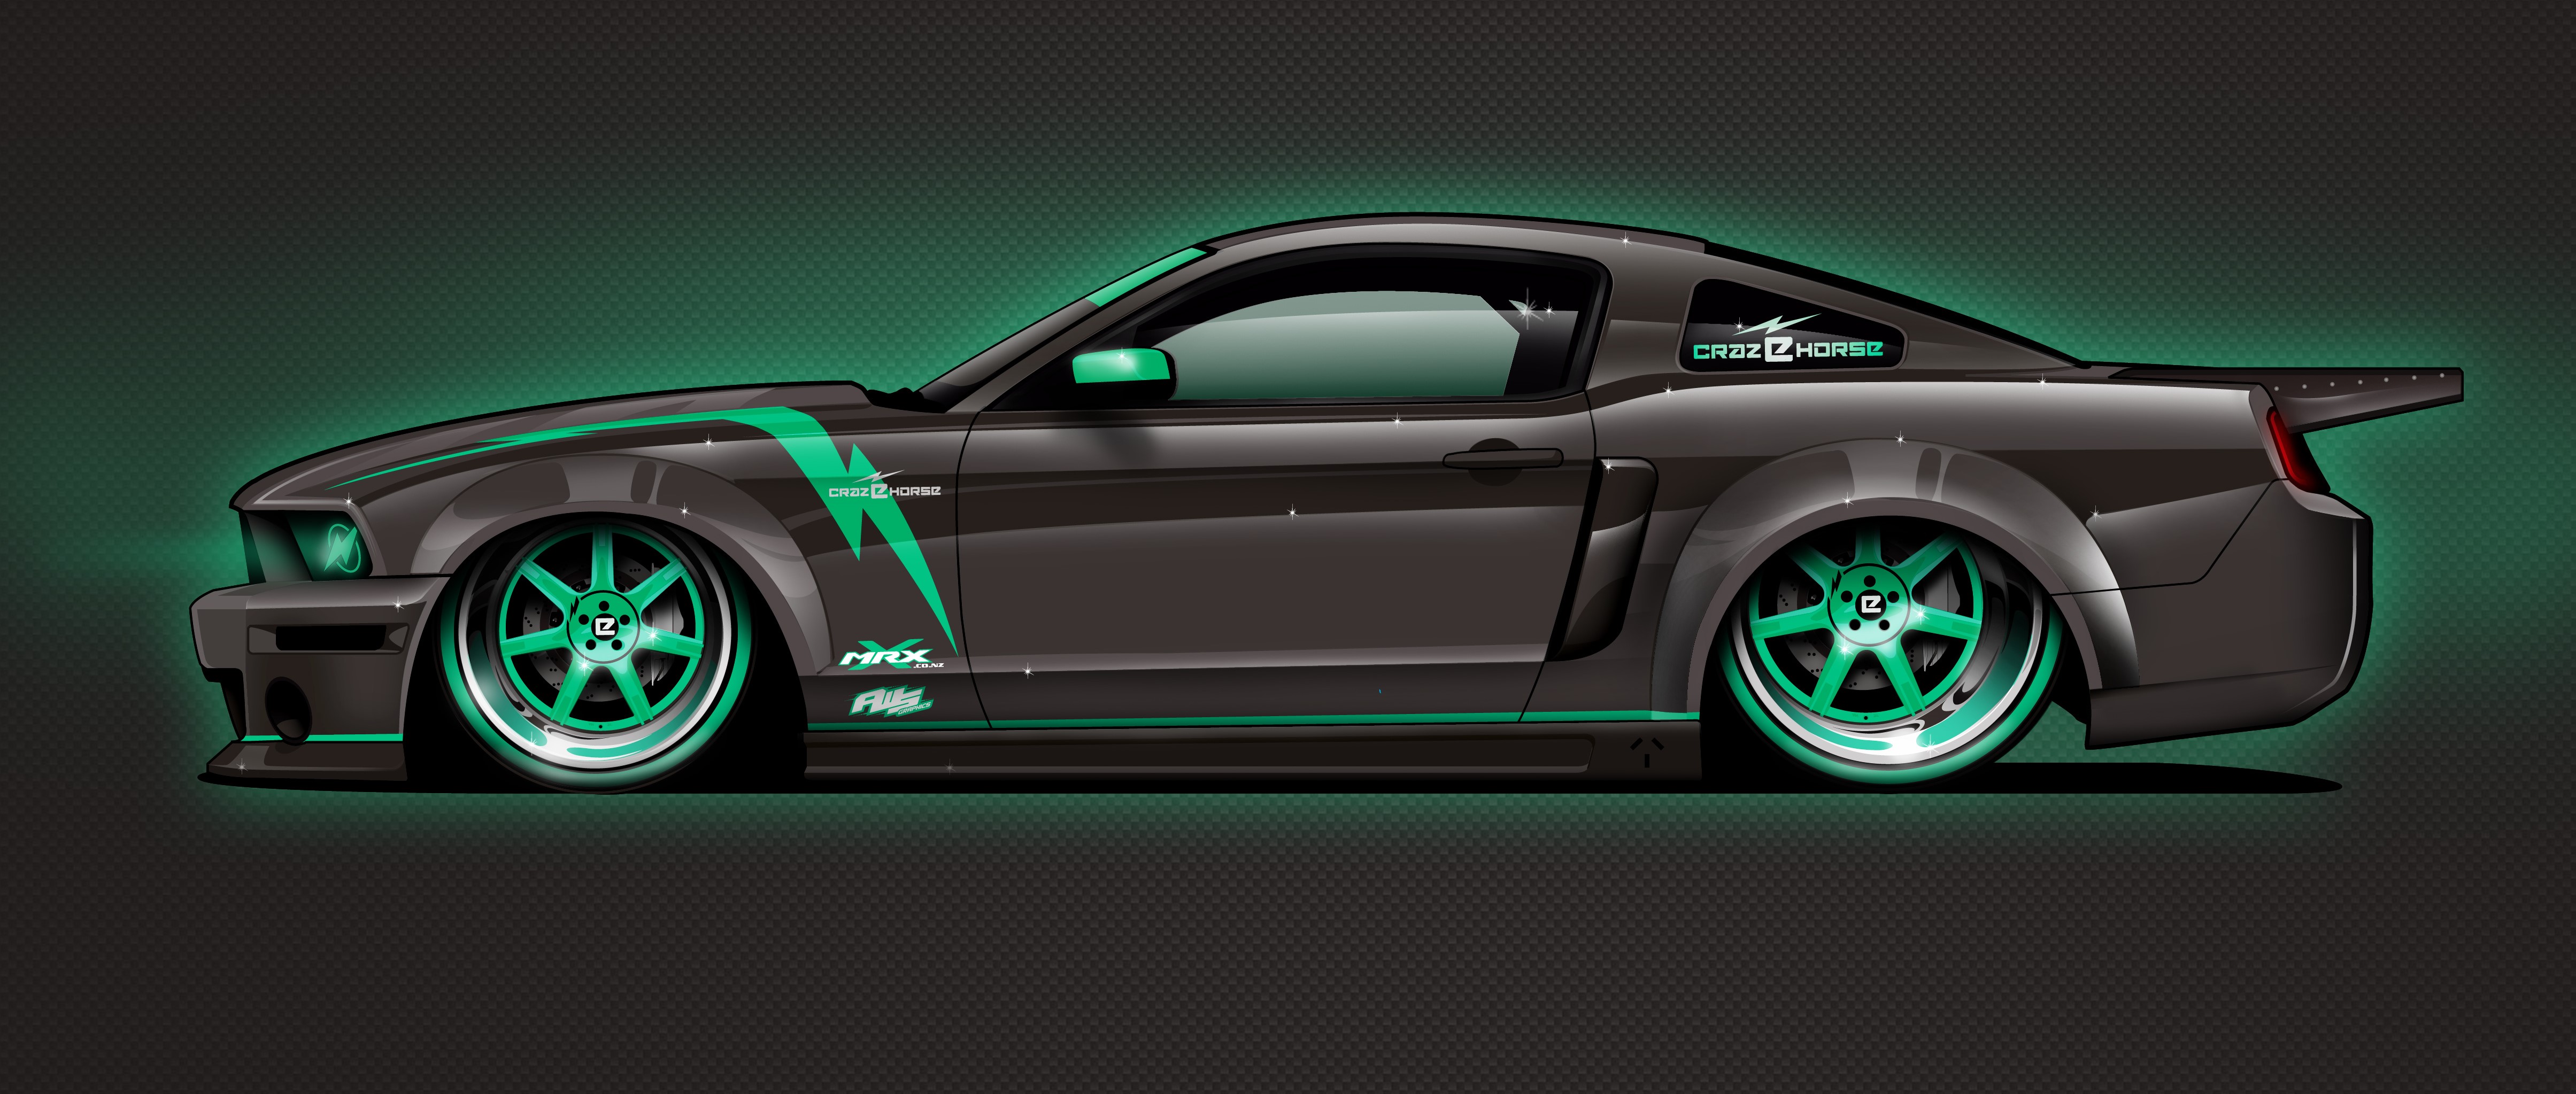 CRC Speedshow to build record-breaking ‘Craz-E Horse’ electric Mustang